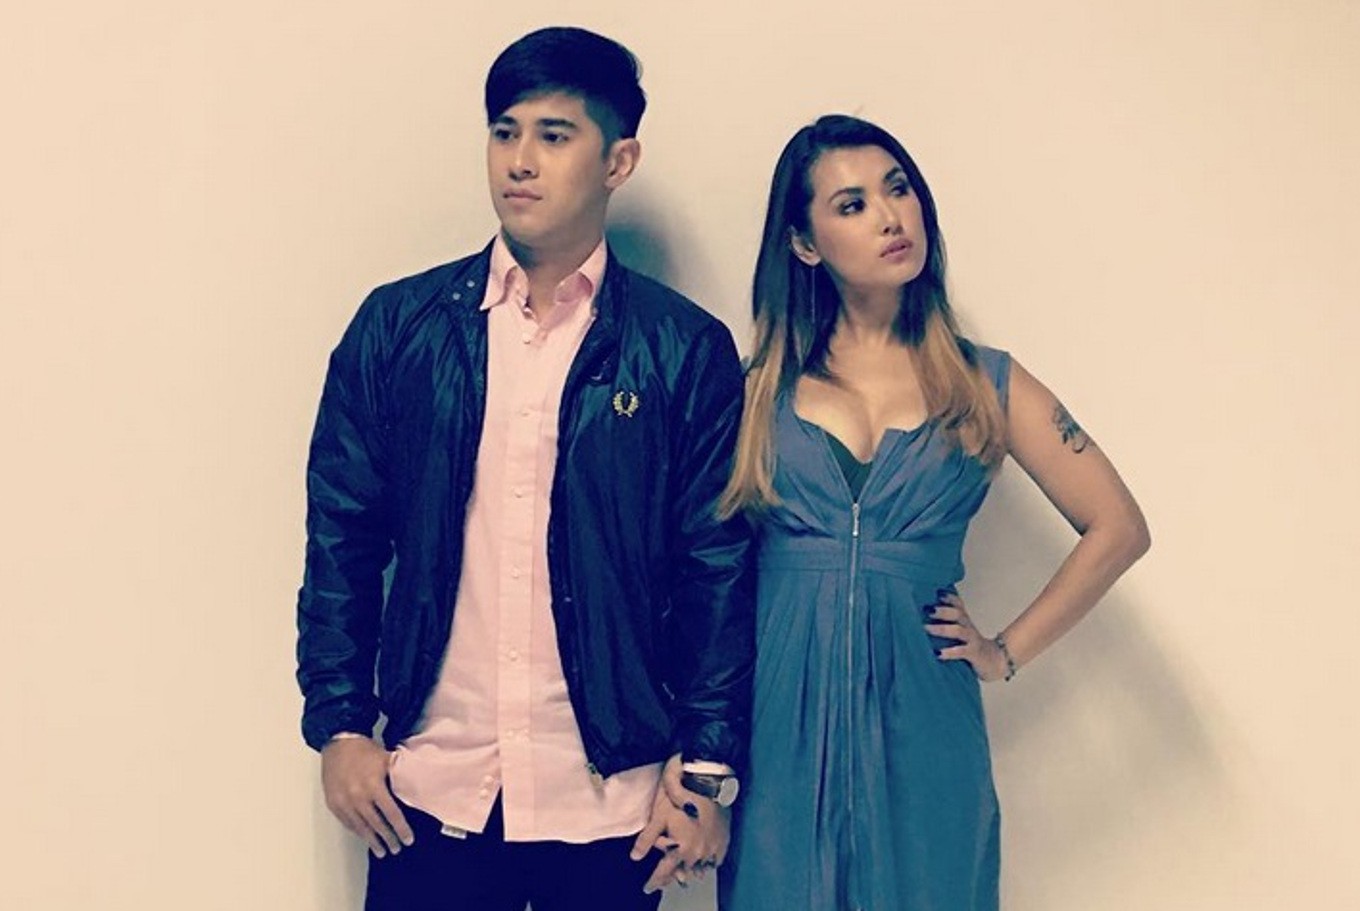 sarasola who was once a contestant in pinoy fear factor also gave his new instagram followers a glimpse of their romantic photoshoot - filipino instagram followers